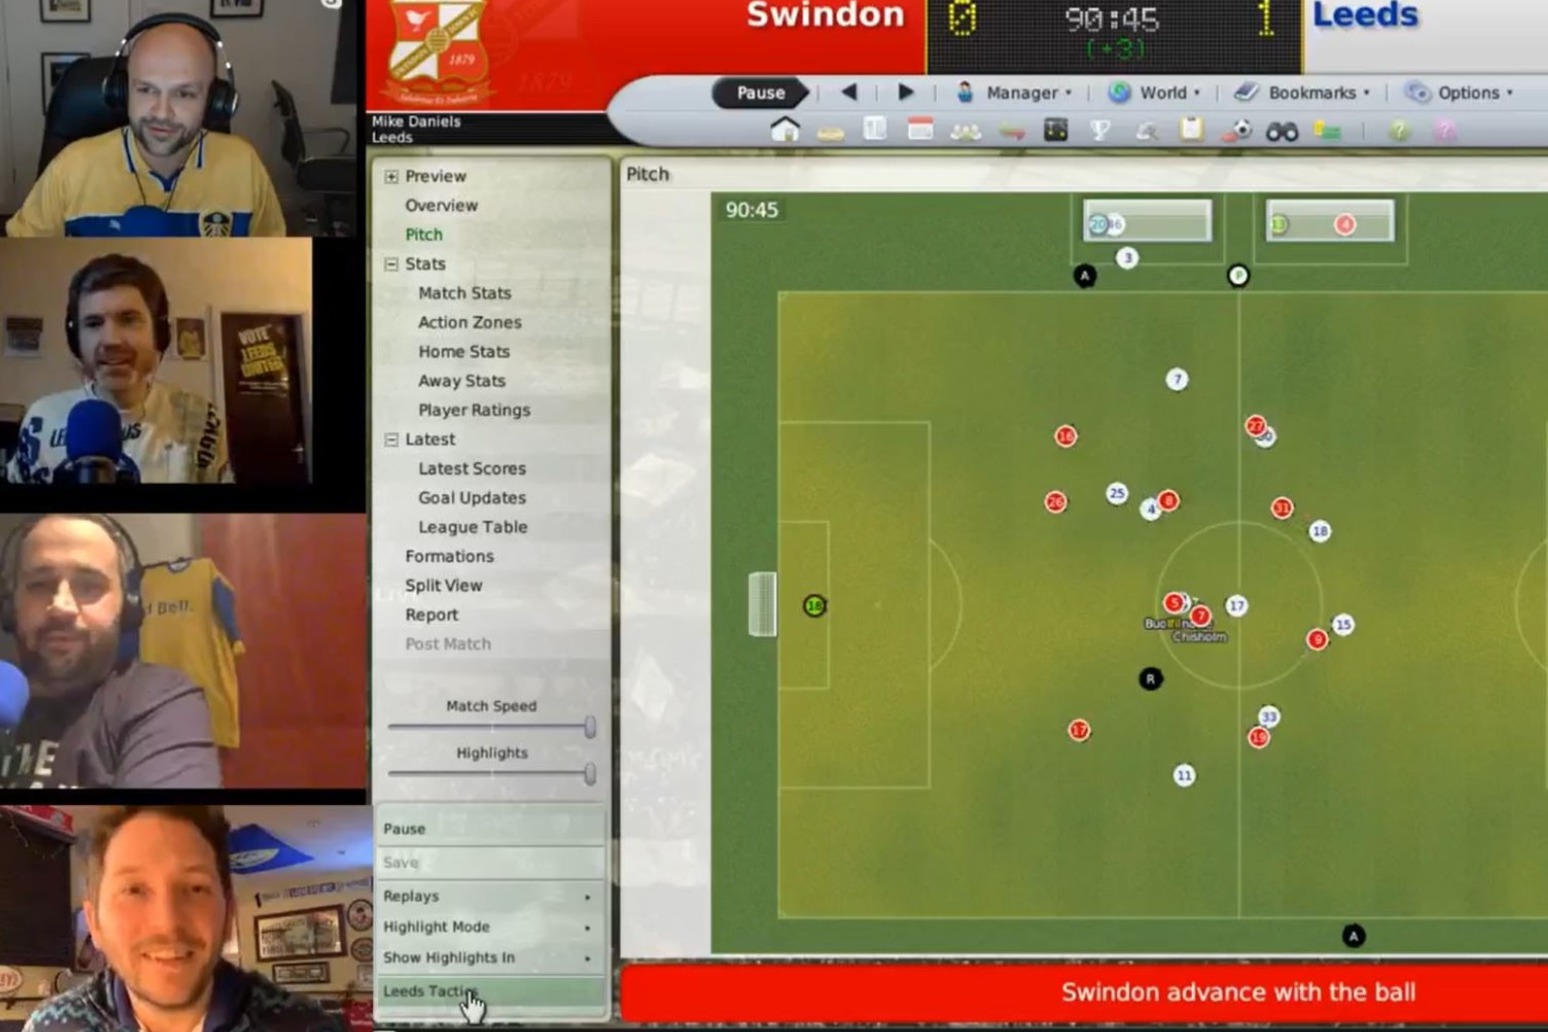 Leeds fans raise £12,000 for food banks by playing football manager for 24 hours 